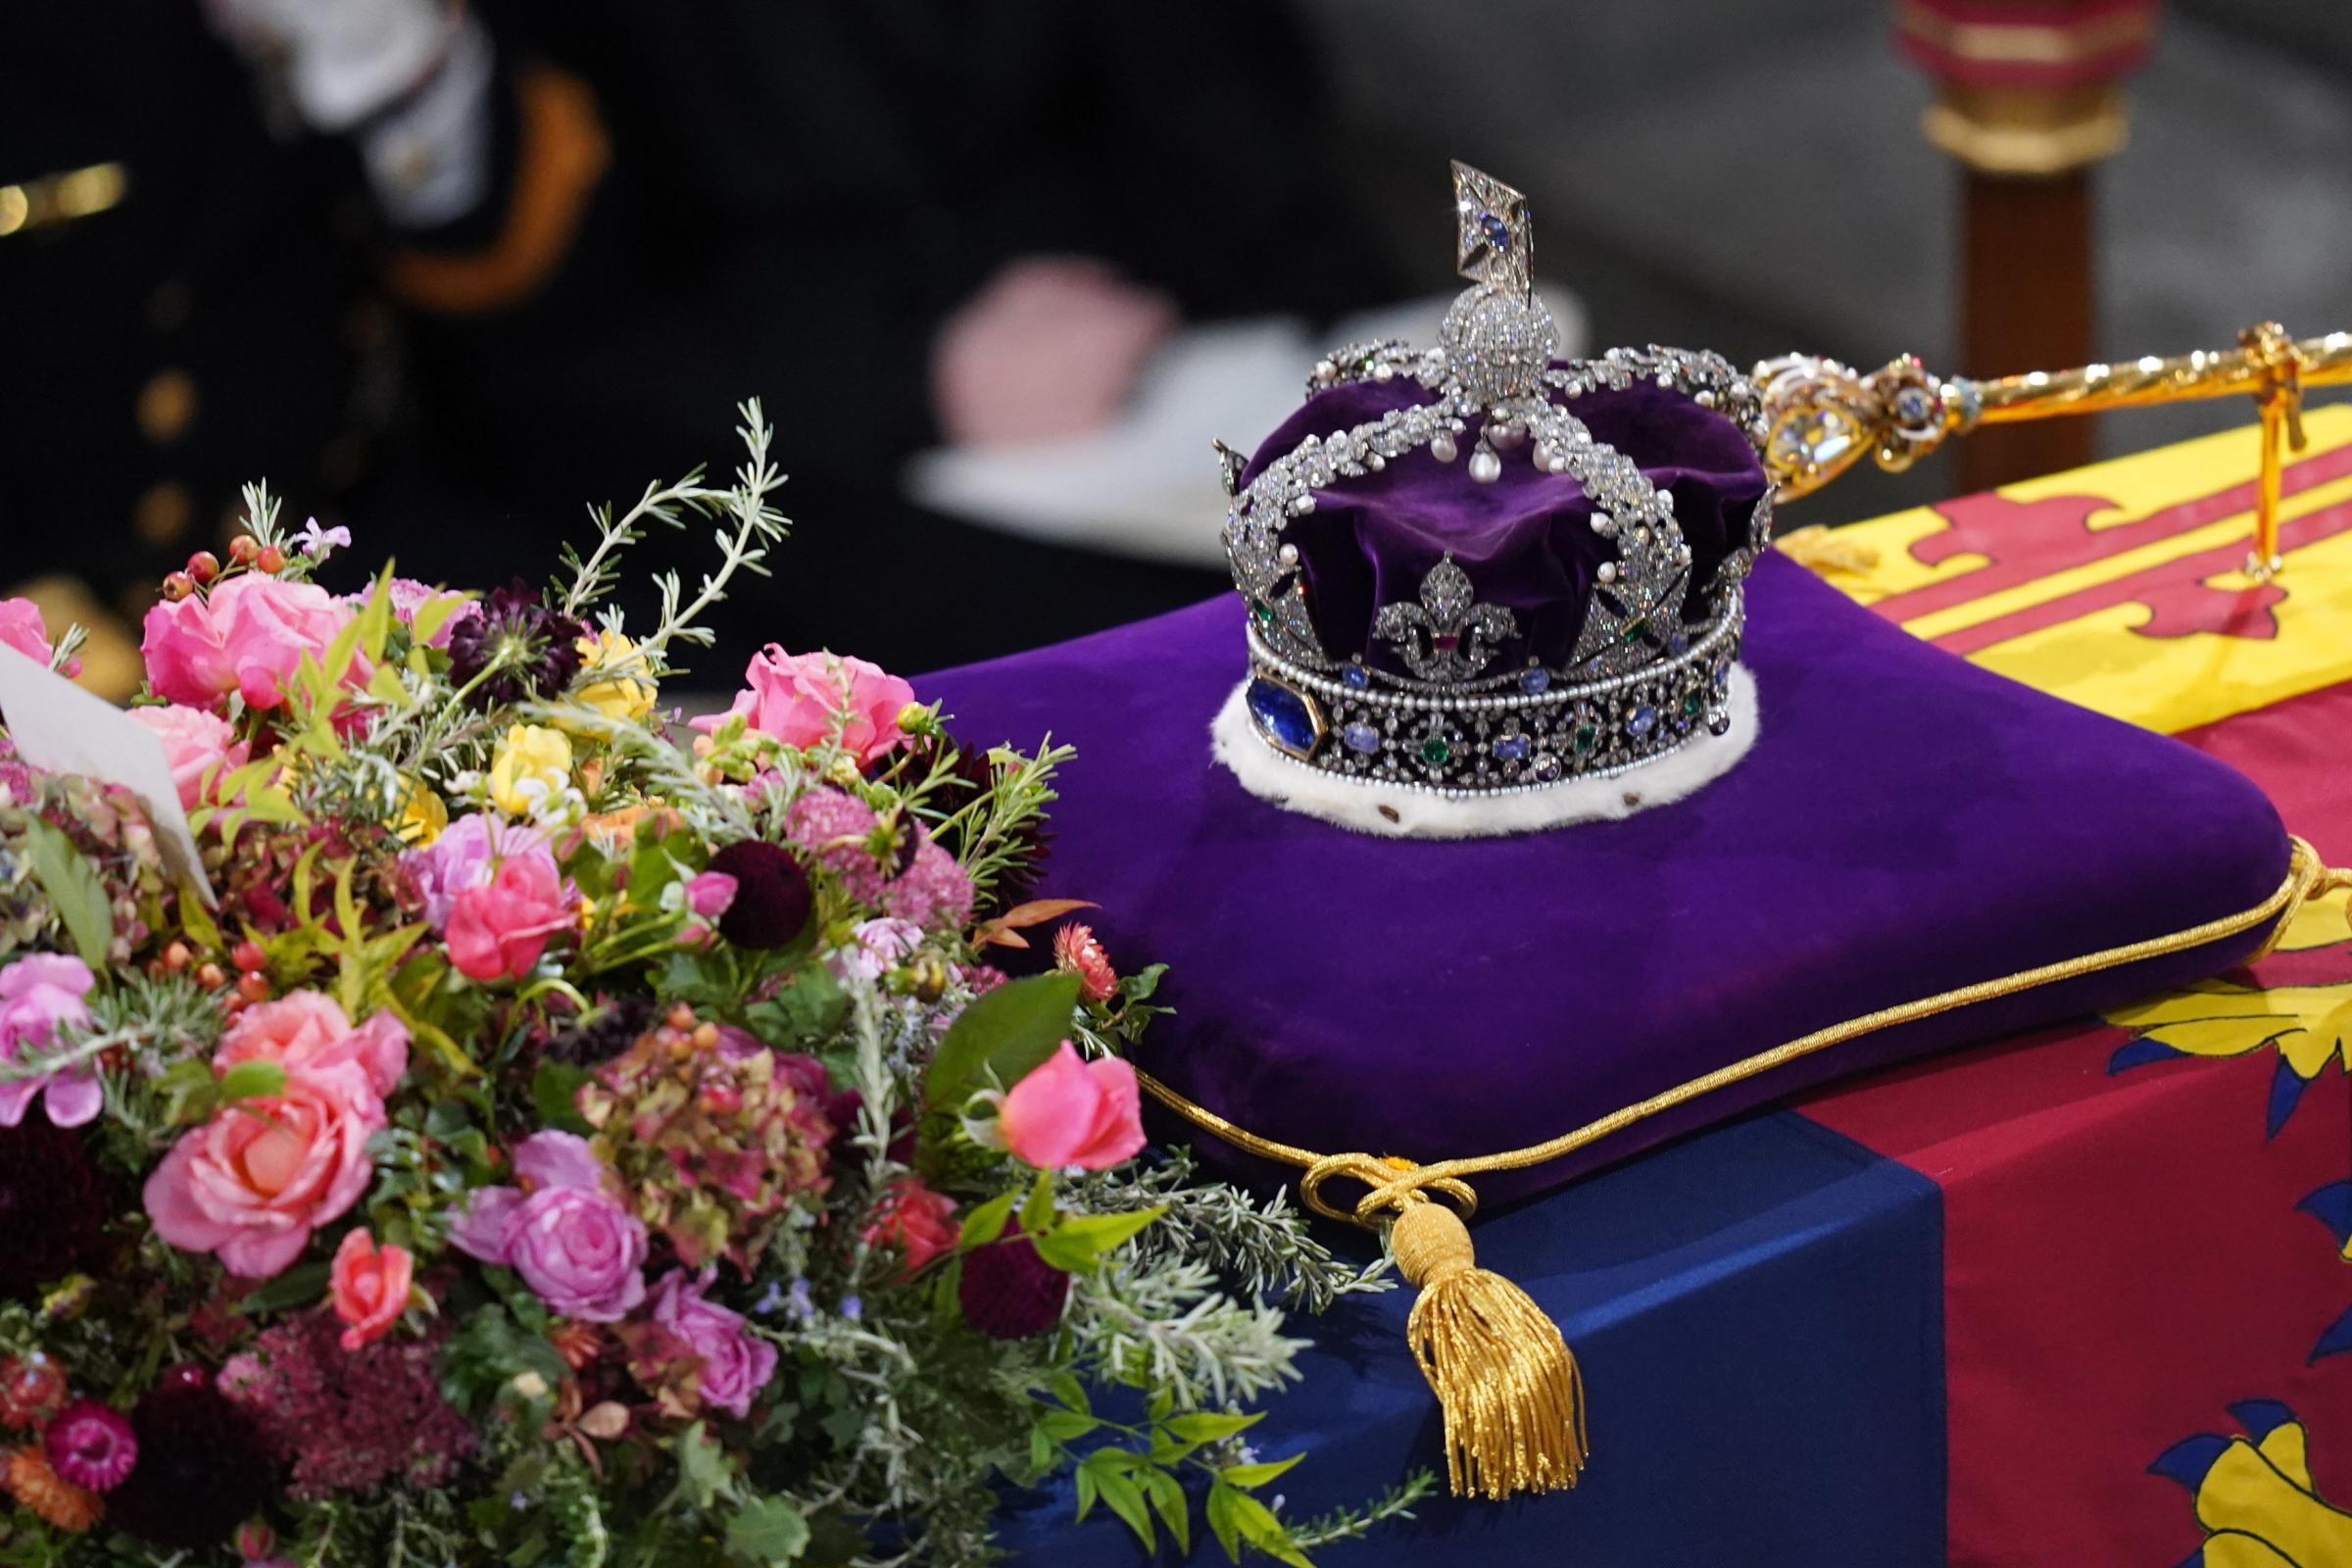 The whole world watched the funeral in London that was fit for The Queen